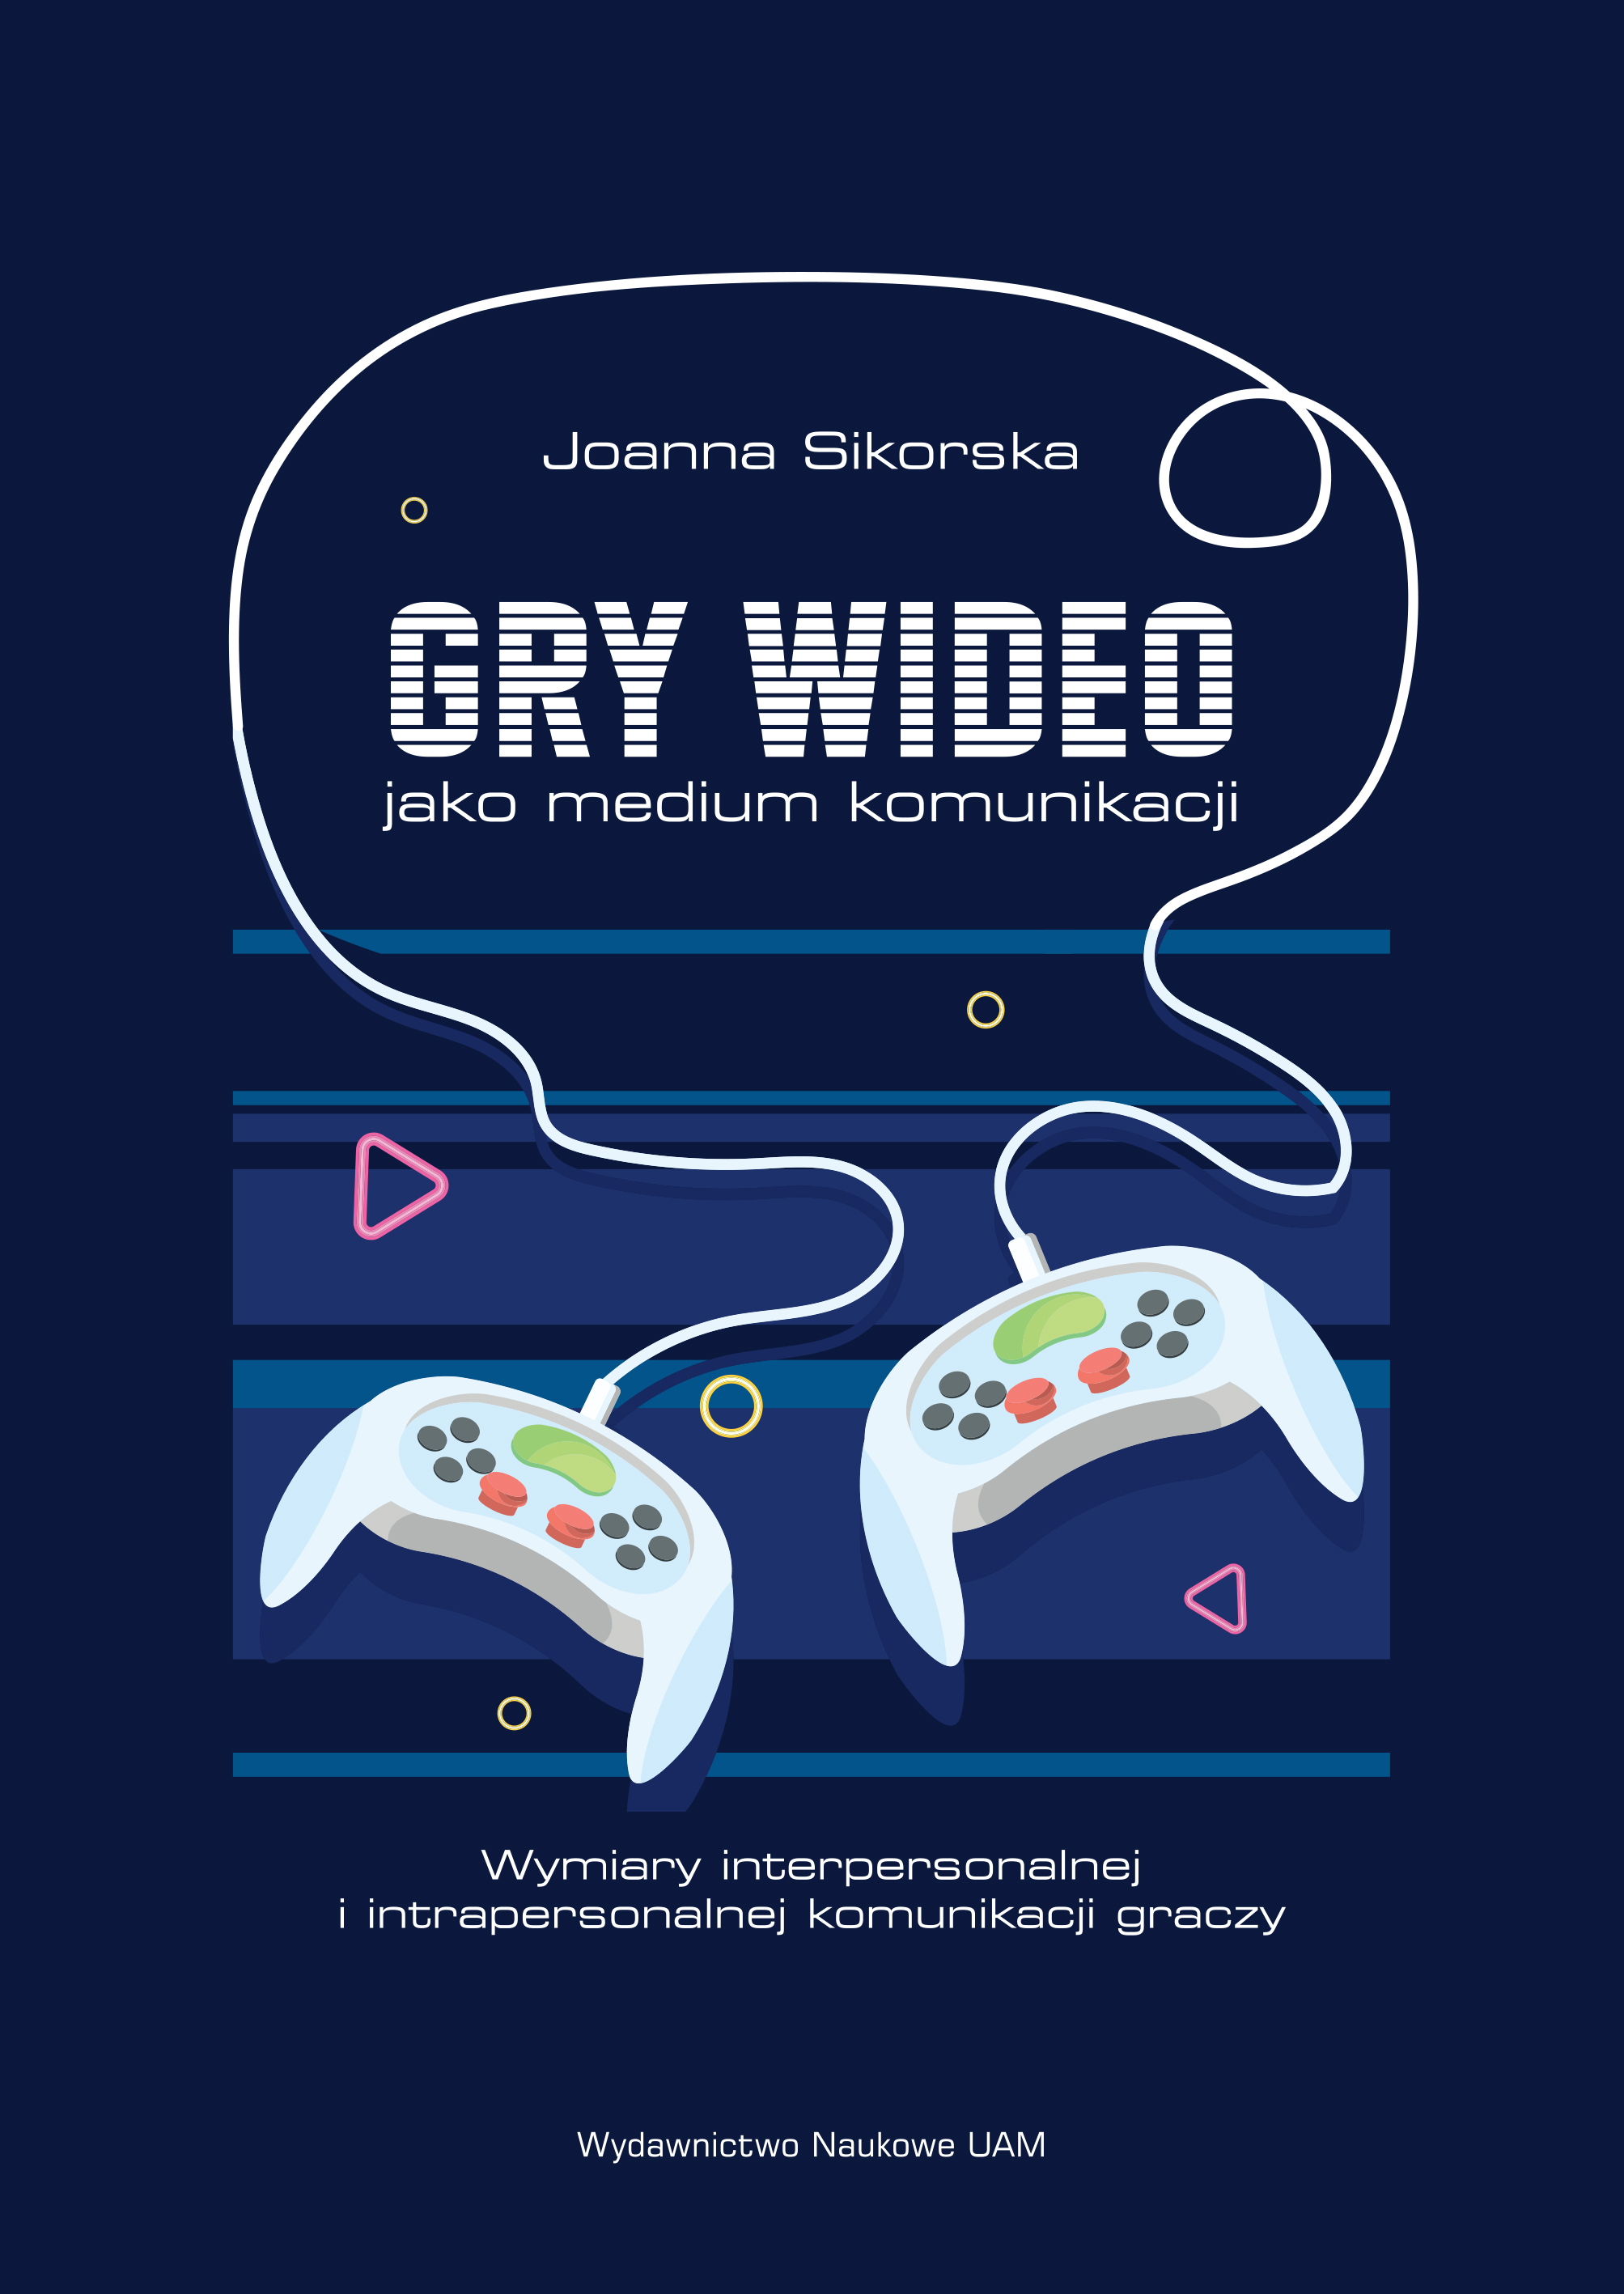 Video Games as a Medium of Communication. Modes and Dimensions of Interpersonal and Intrapersonal Communication among Gamers